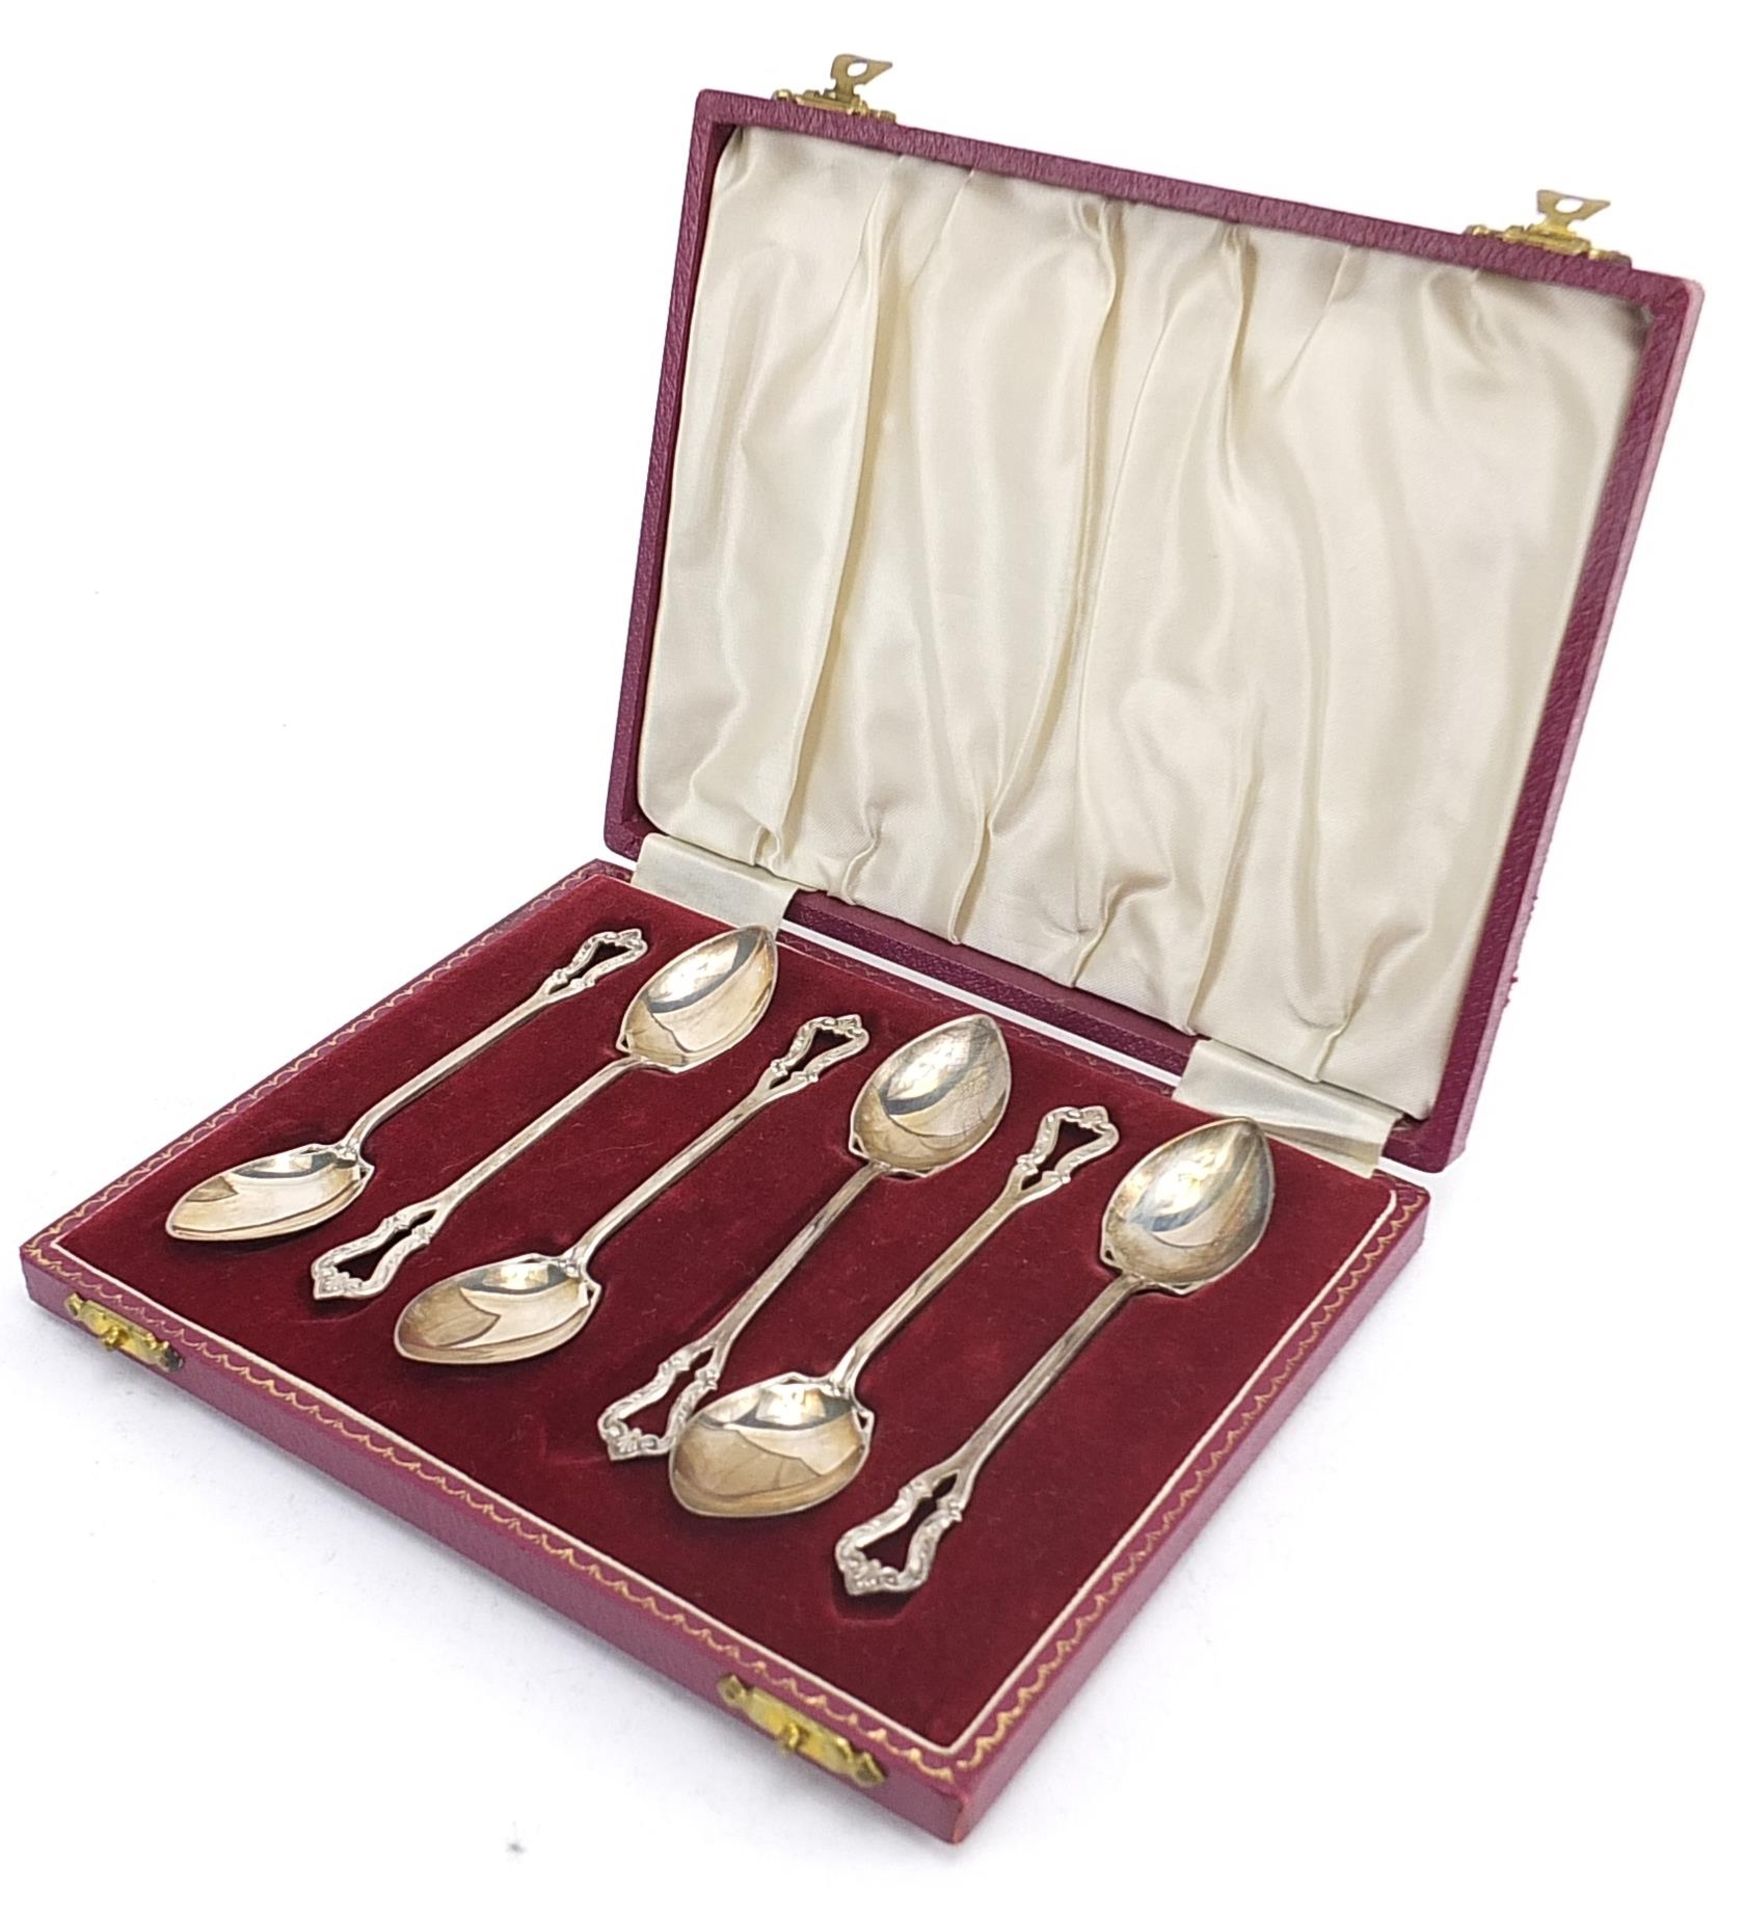 Henry Clifford Davis, set of six Art Nouveau style silver teaspoons housed in a velvet and silk